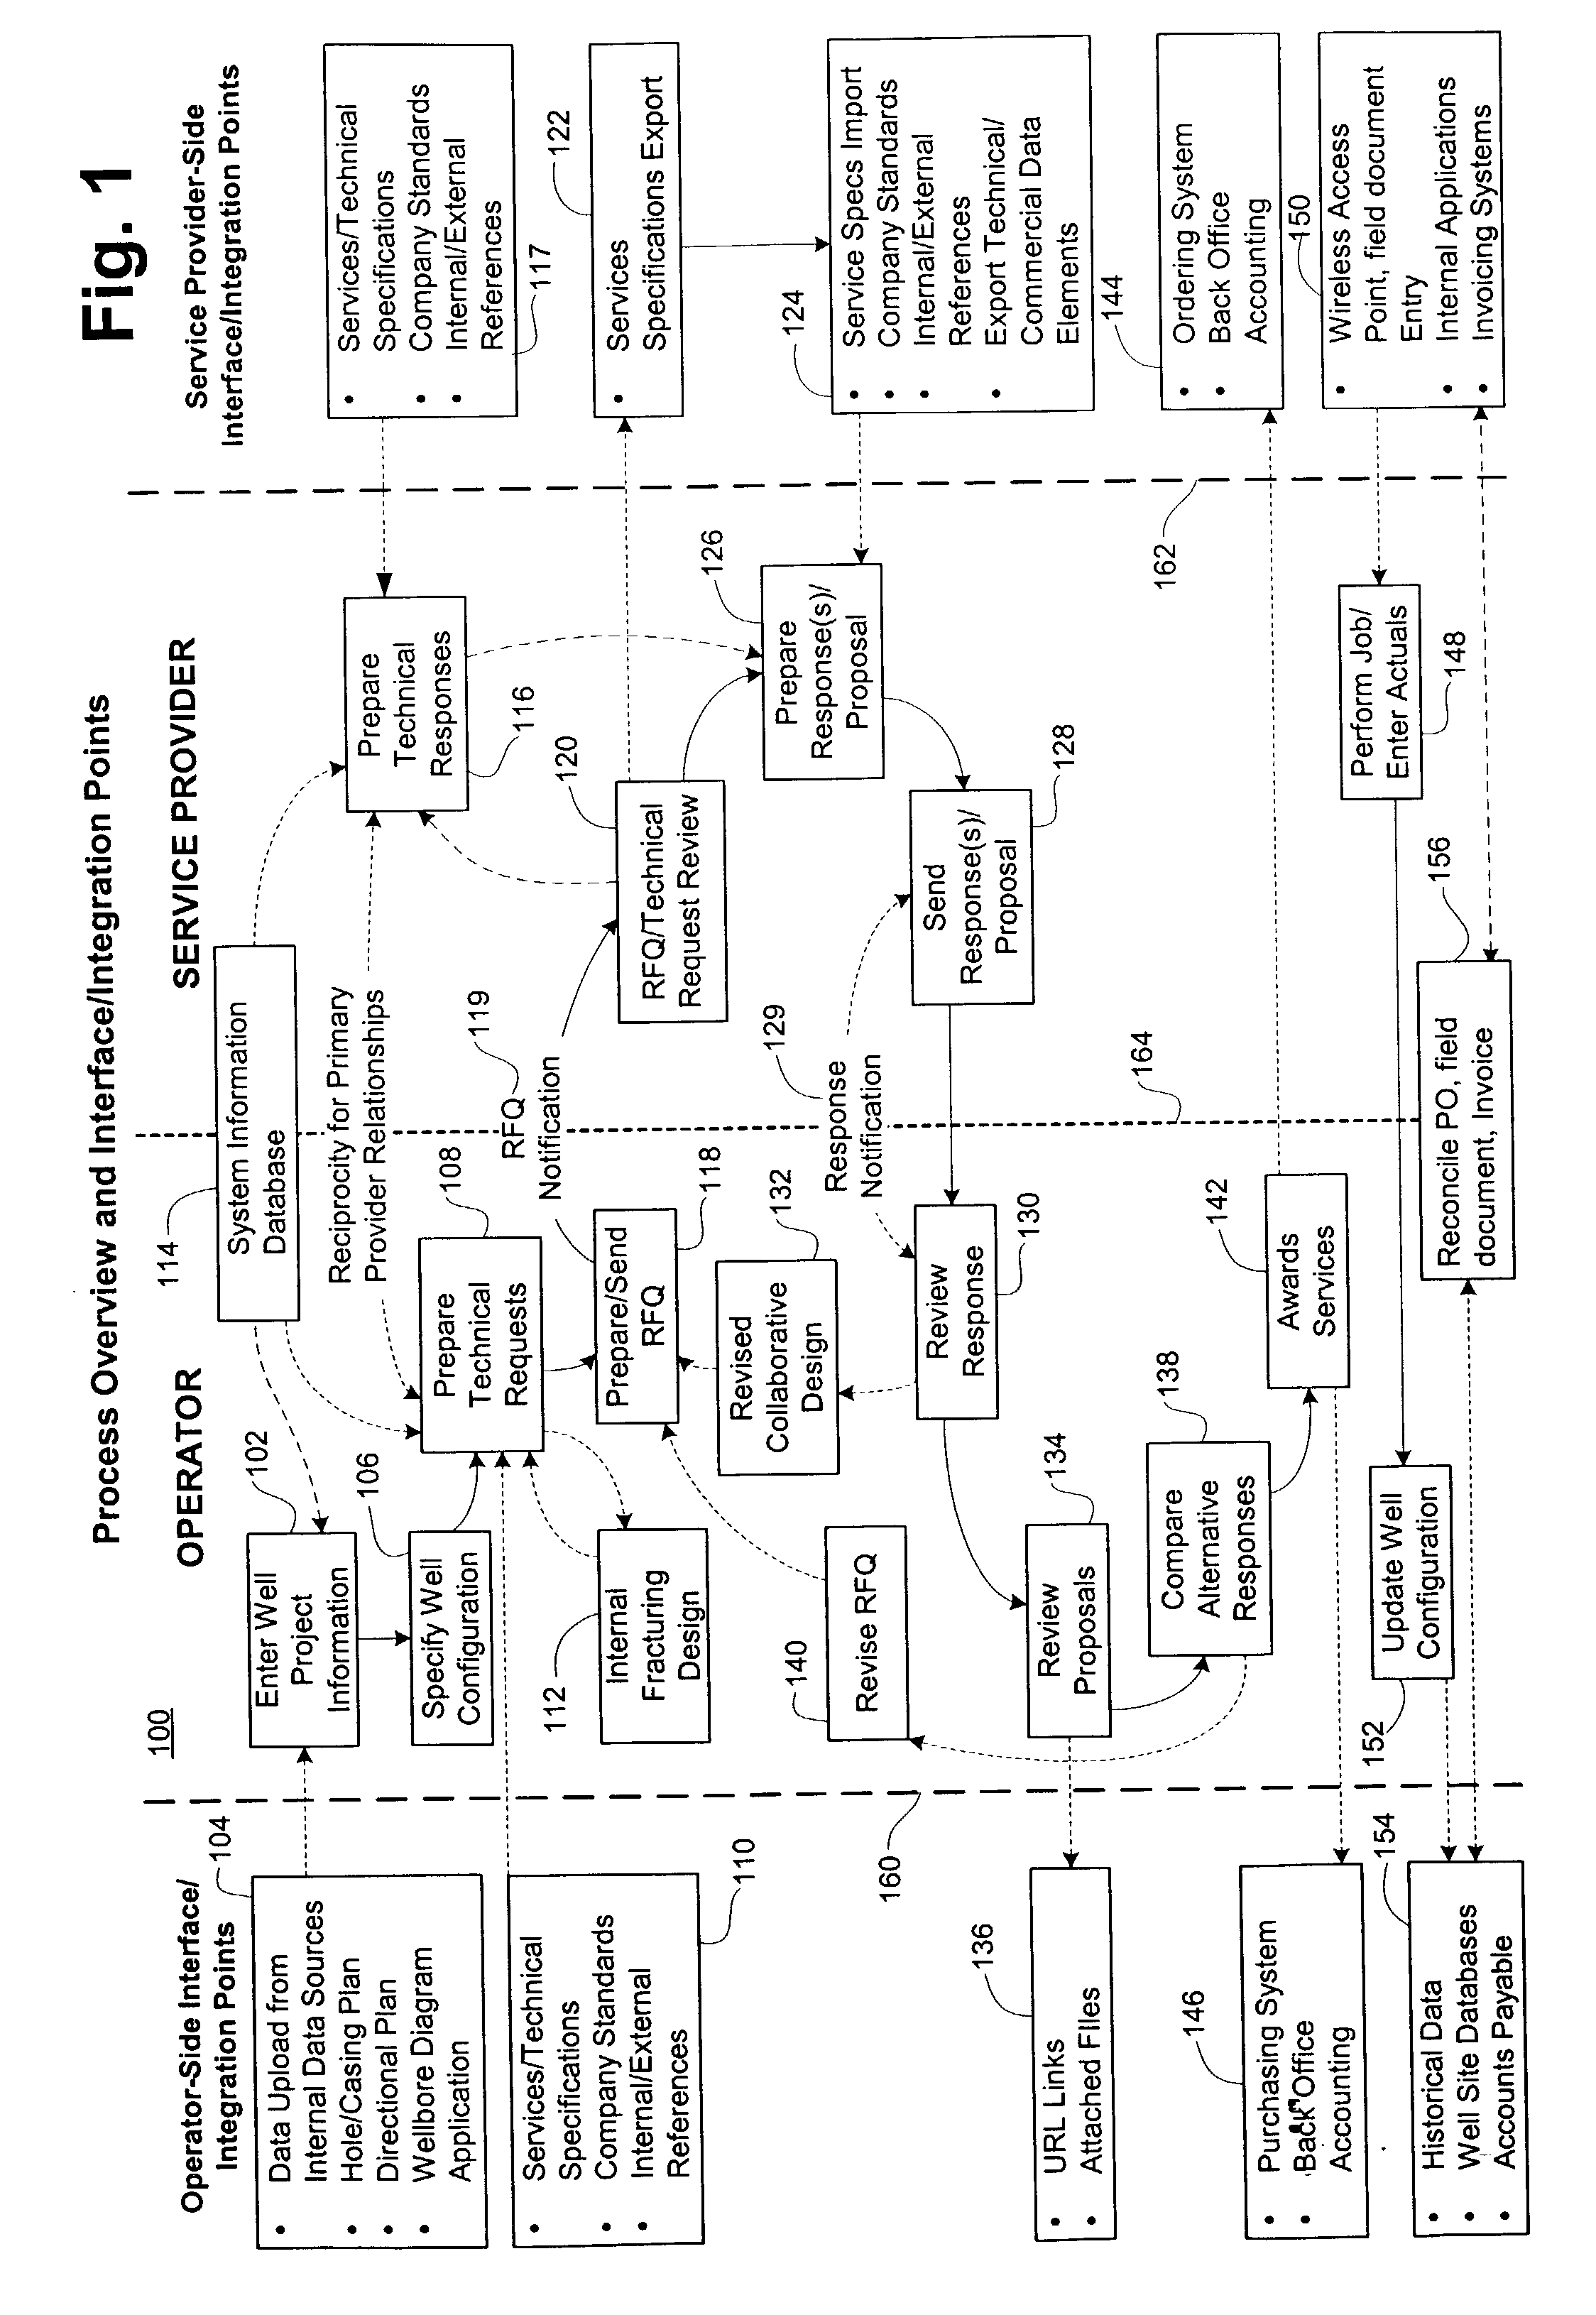 Process and system for tracking versions of field documentation data collection configurations in a complex project workflow system